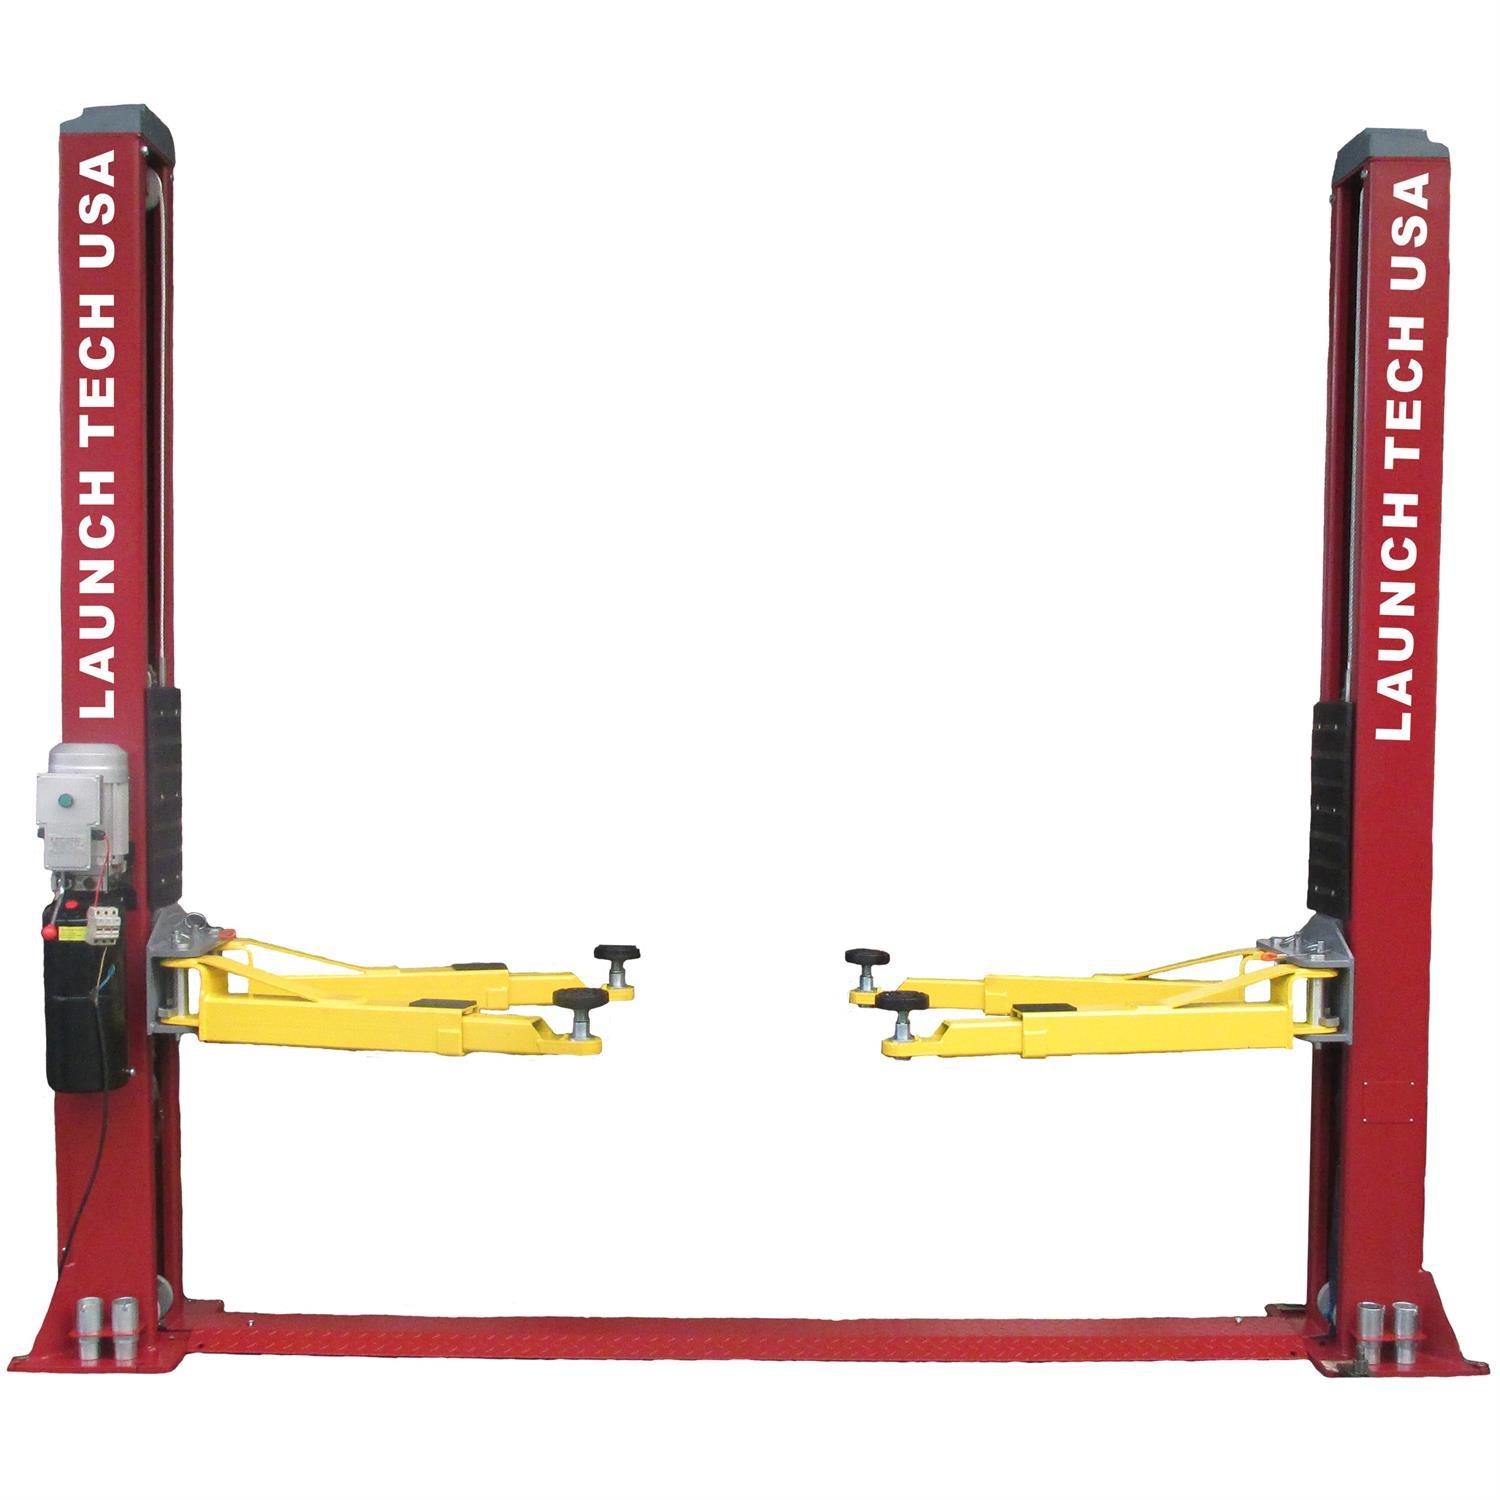 Launch 2-Post Symmetrical Automotive Lift with 9,000 lbs. Lifting Capacity with Open Top Design